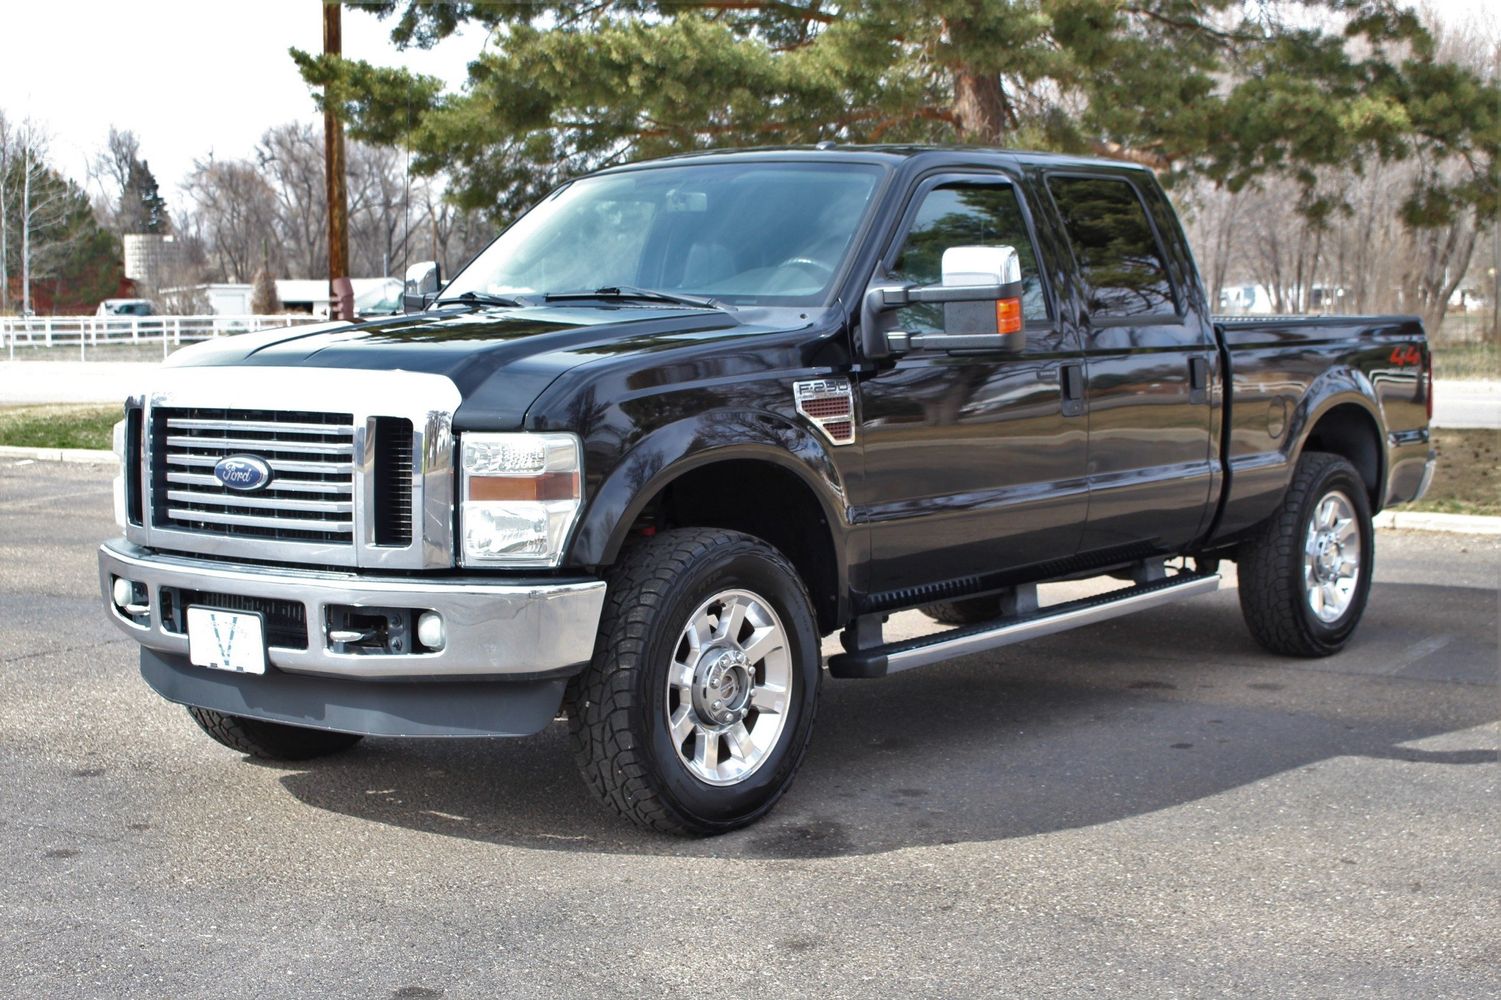 2009 Ford F-250 Super Duty Lariat | Victory Motors of Colorado 2009 Ford F250 Super Duty 5.4 Towing Capacity